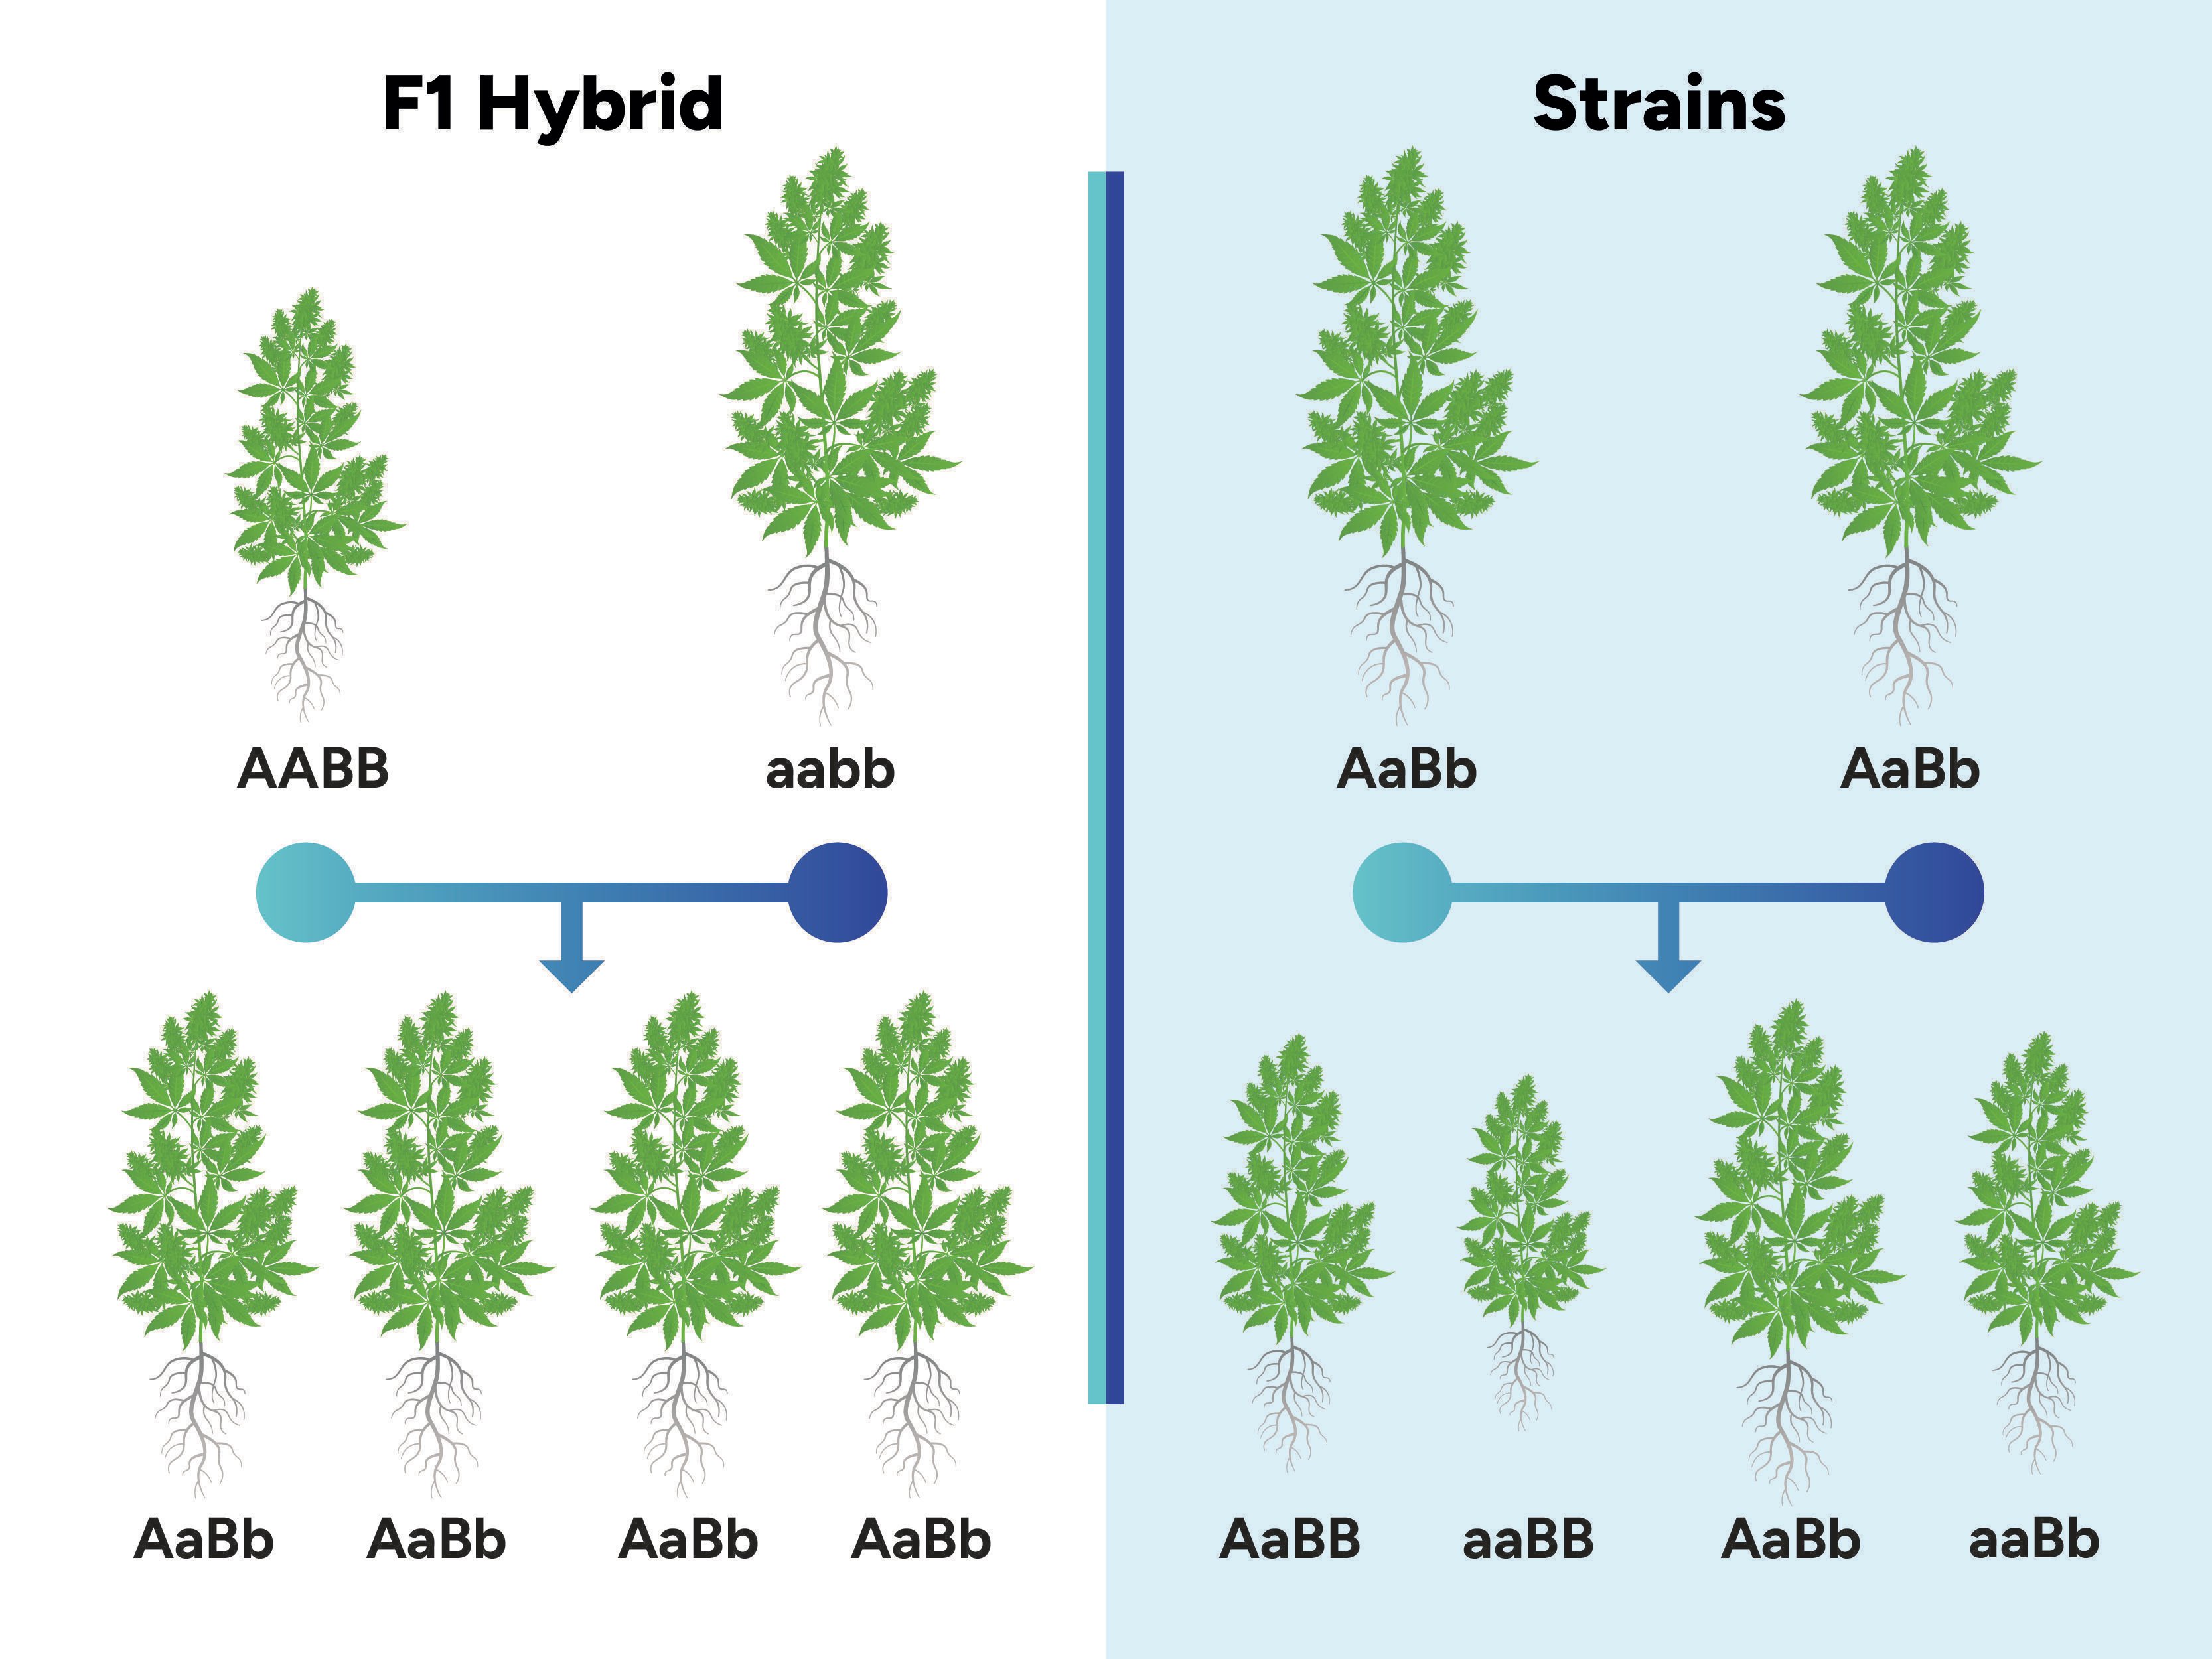 What Are F1 Cannabis Hybrids?